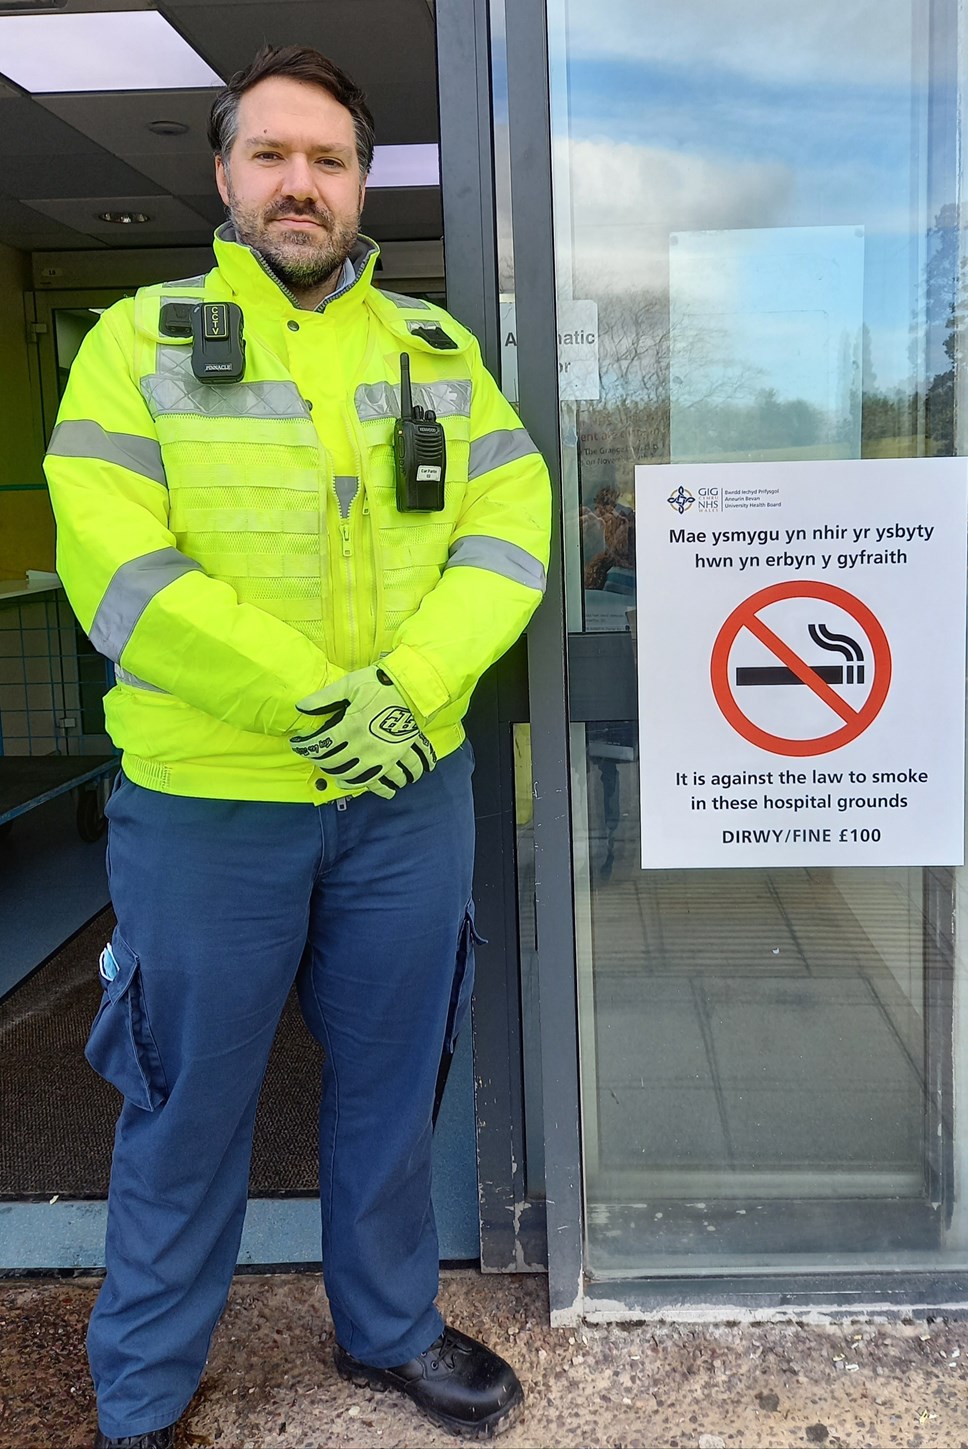 Smoke Free Officer with new signage 2-2